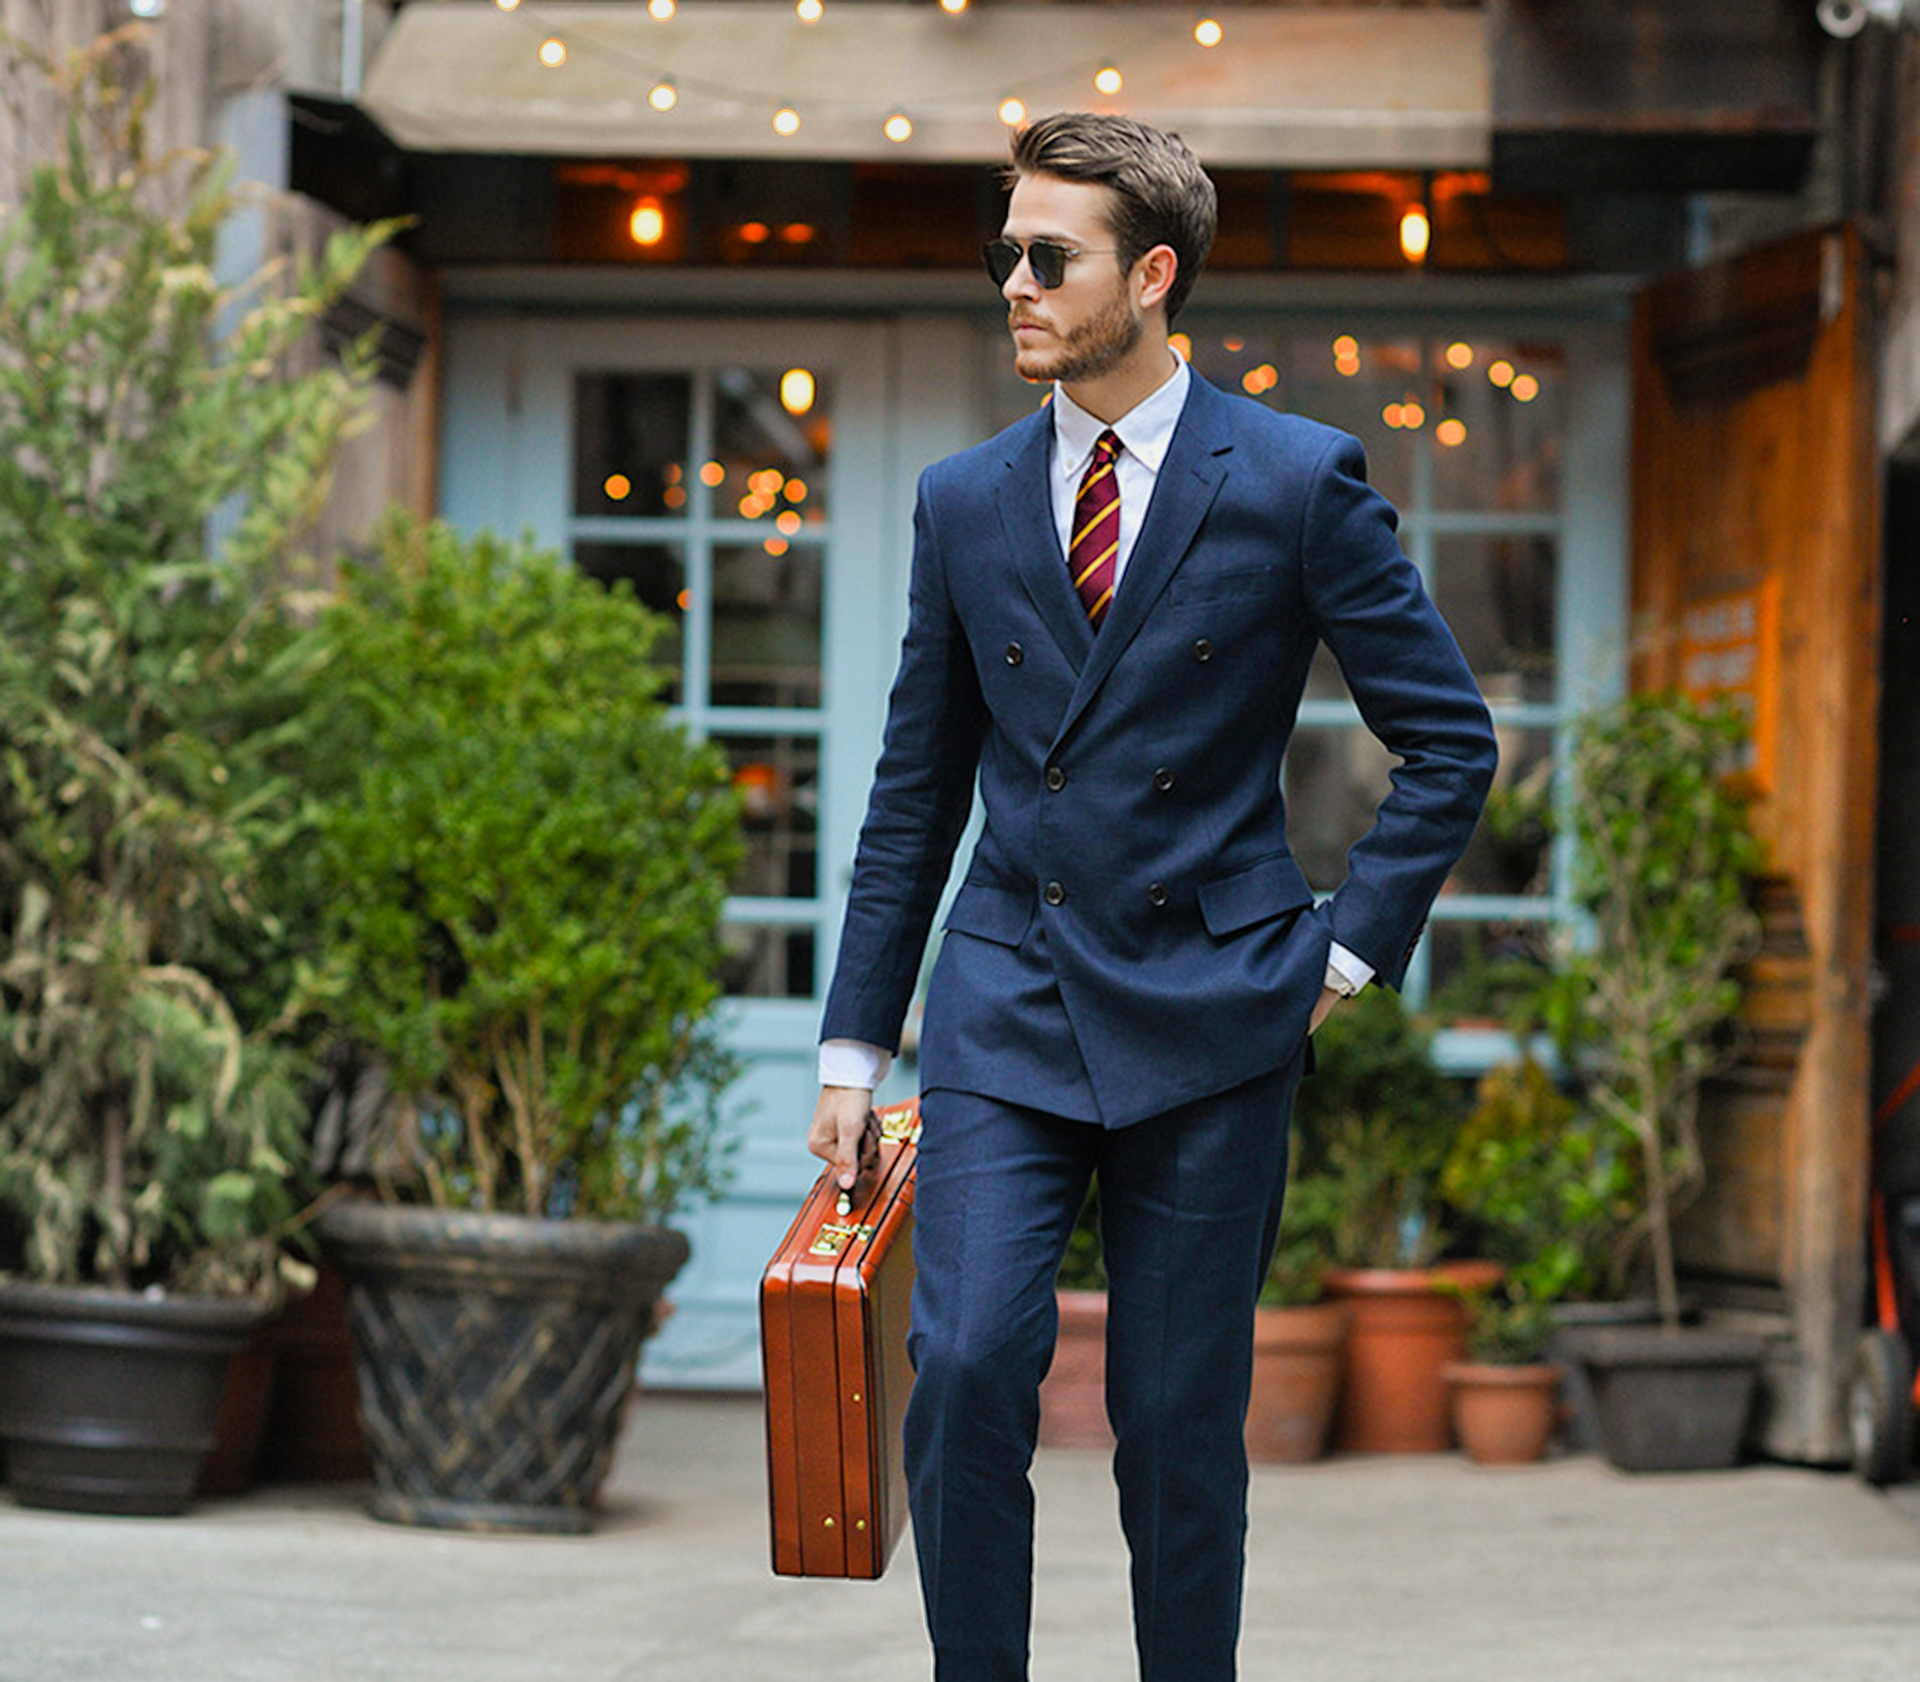 Men's Suit Guide: Basics & How to Choose the Perfect Suit - Suits Expert